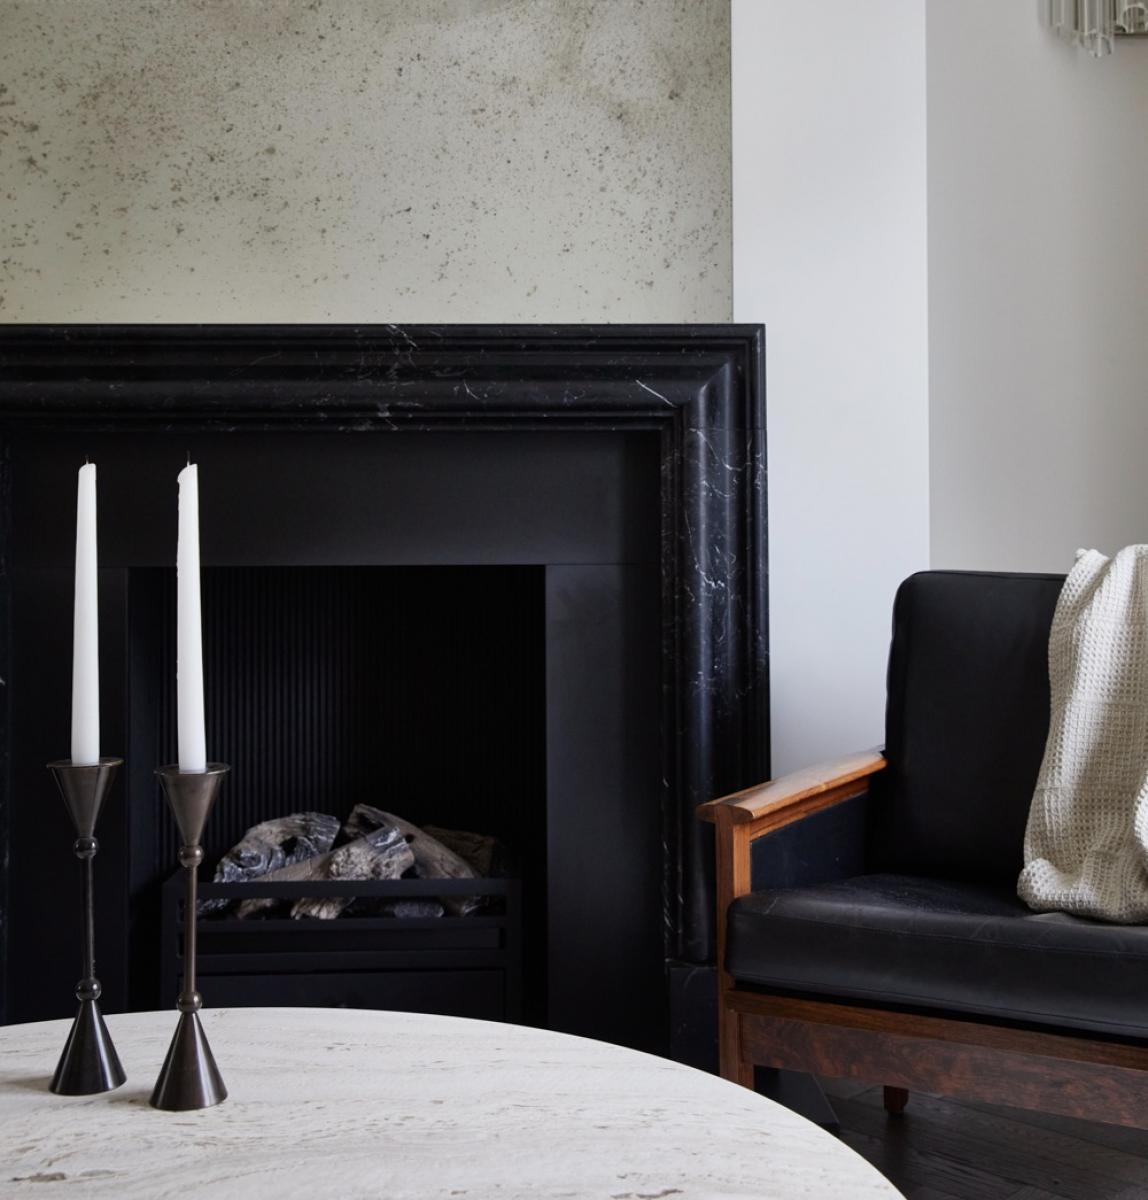 Bolection in Nero Marquina - Victoria Stone - Fireplaces, Wood Stoves ...